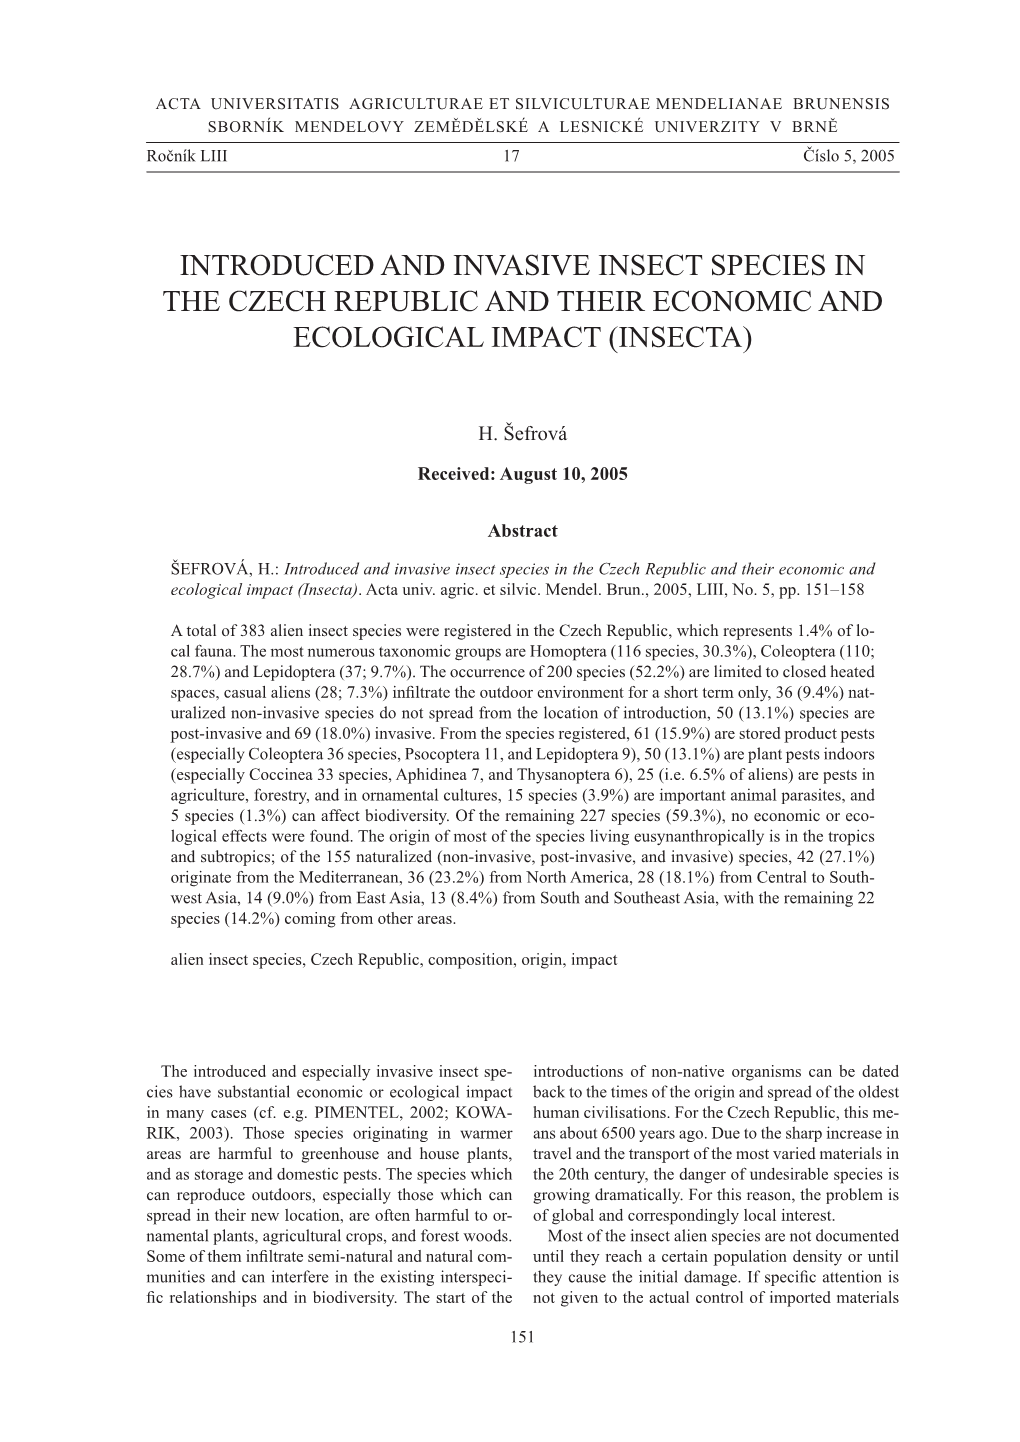 Introduced and Invasive Insect Species in the Czech Republic and Their Economic and Ecological Impact (Insecta)